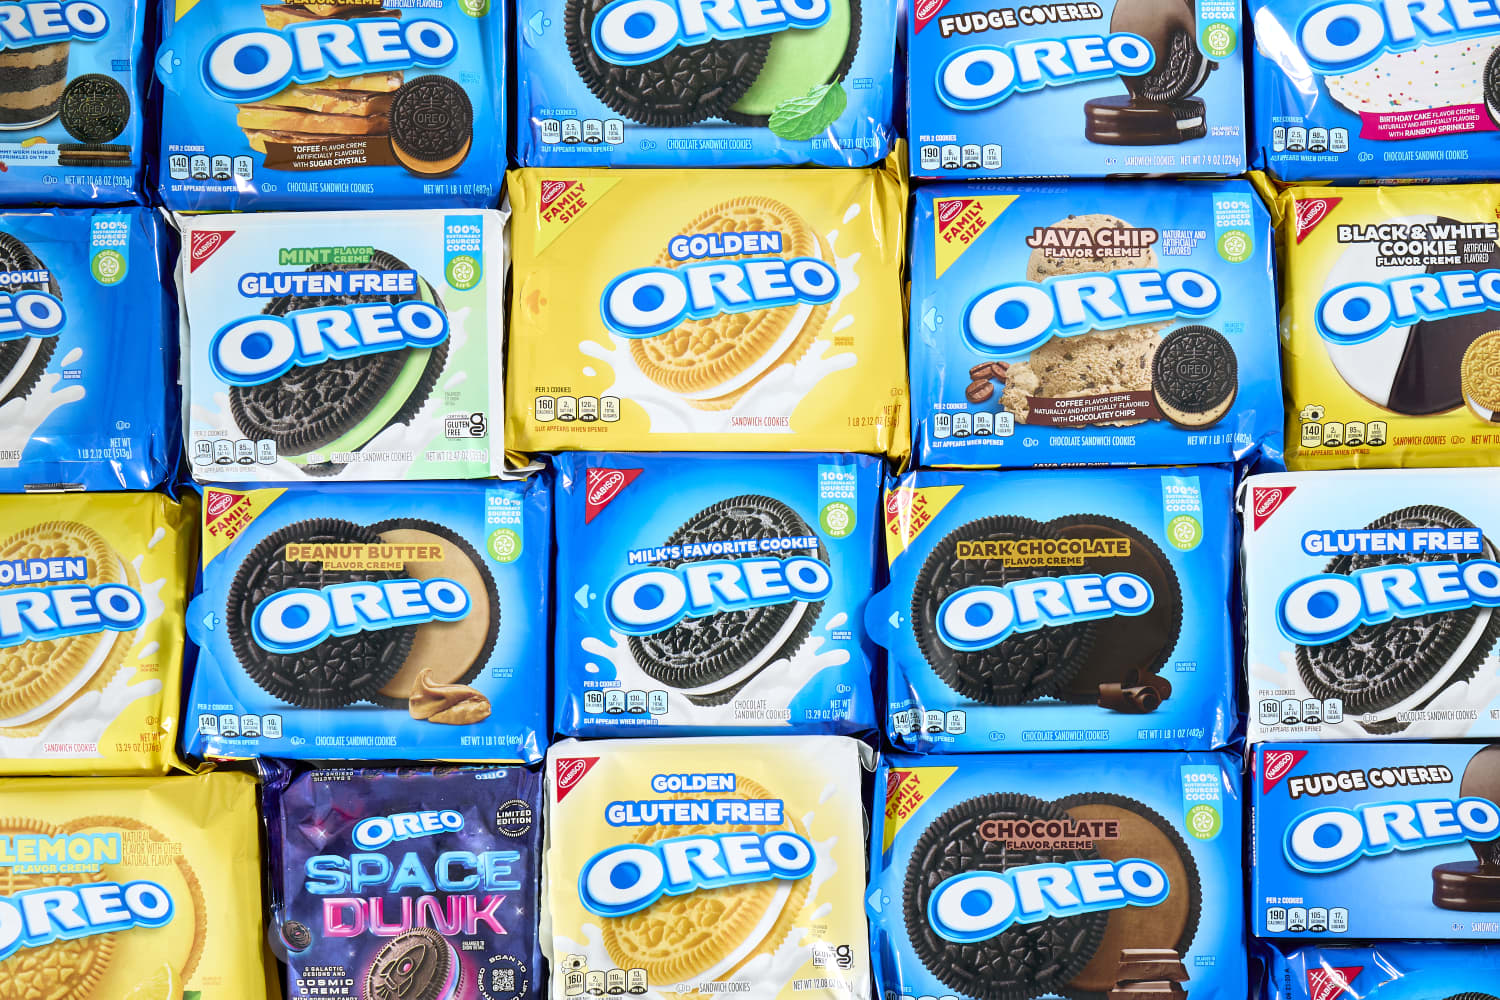 We Tried Every Oreo Flavor We Could Find — And the Debate Between First and Second Place Got Intense